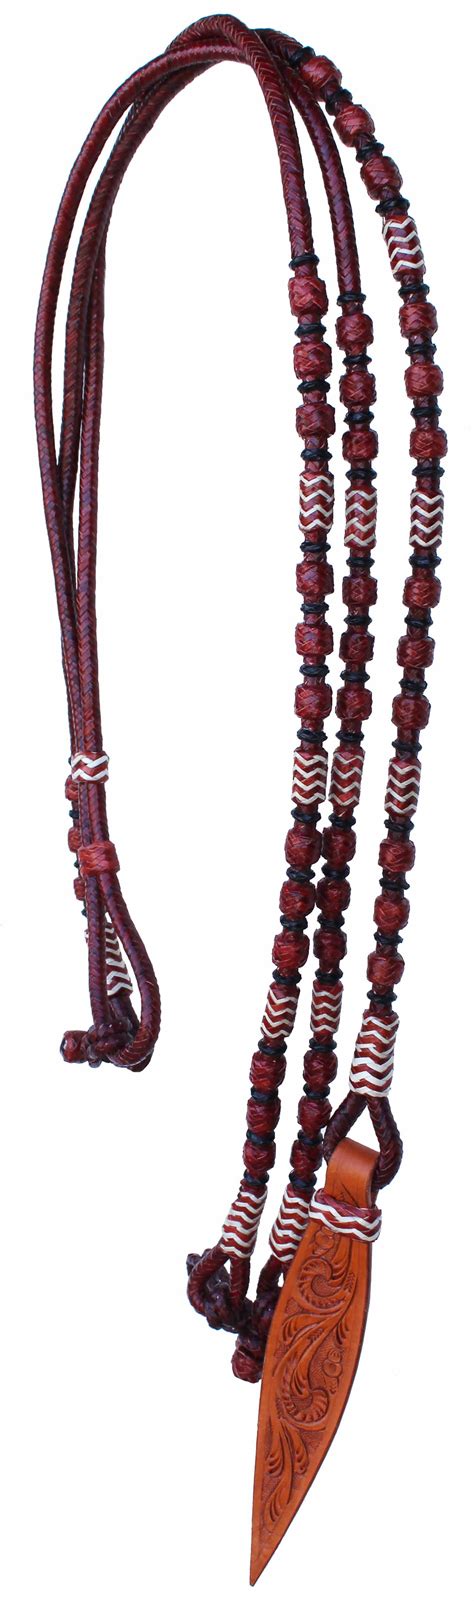 Horse Western Tack Cherry Leather Rawhide Romel Romal Reins Tooled